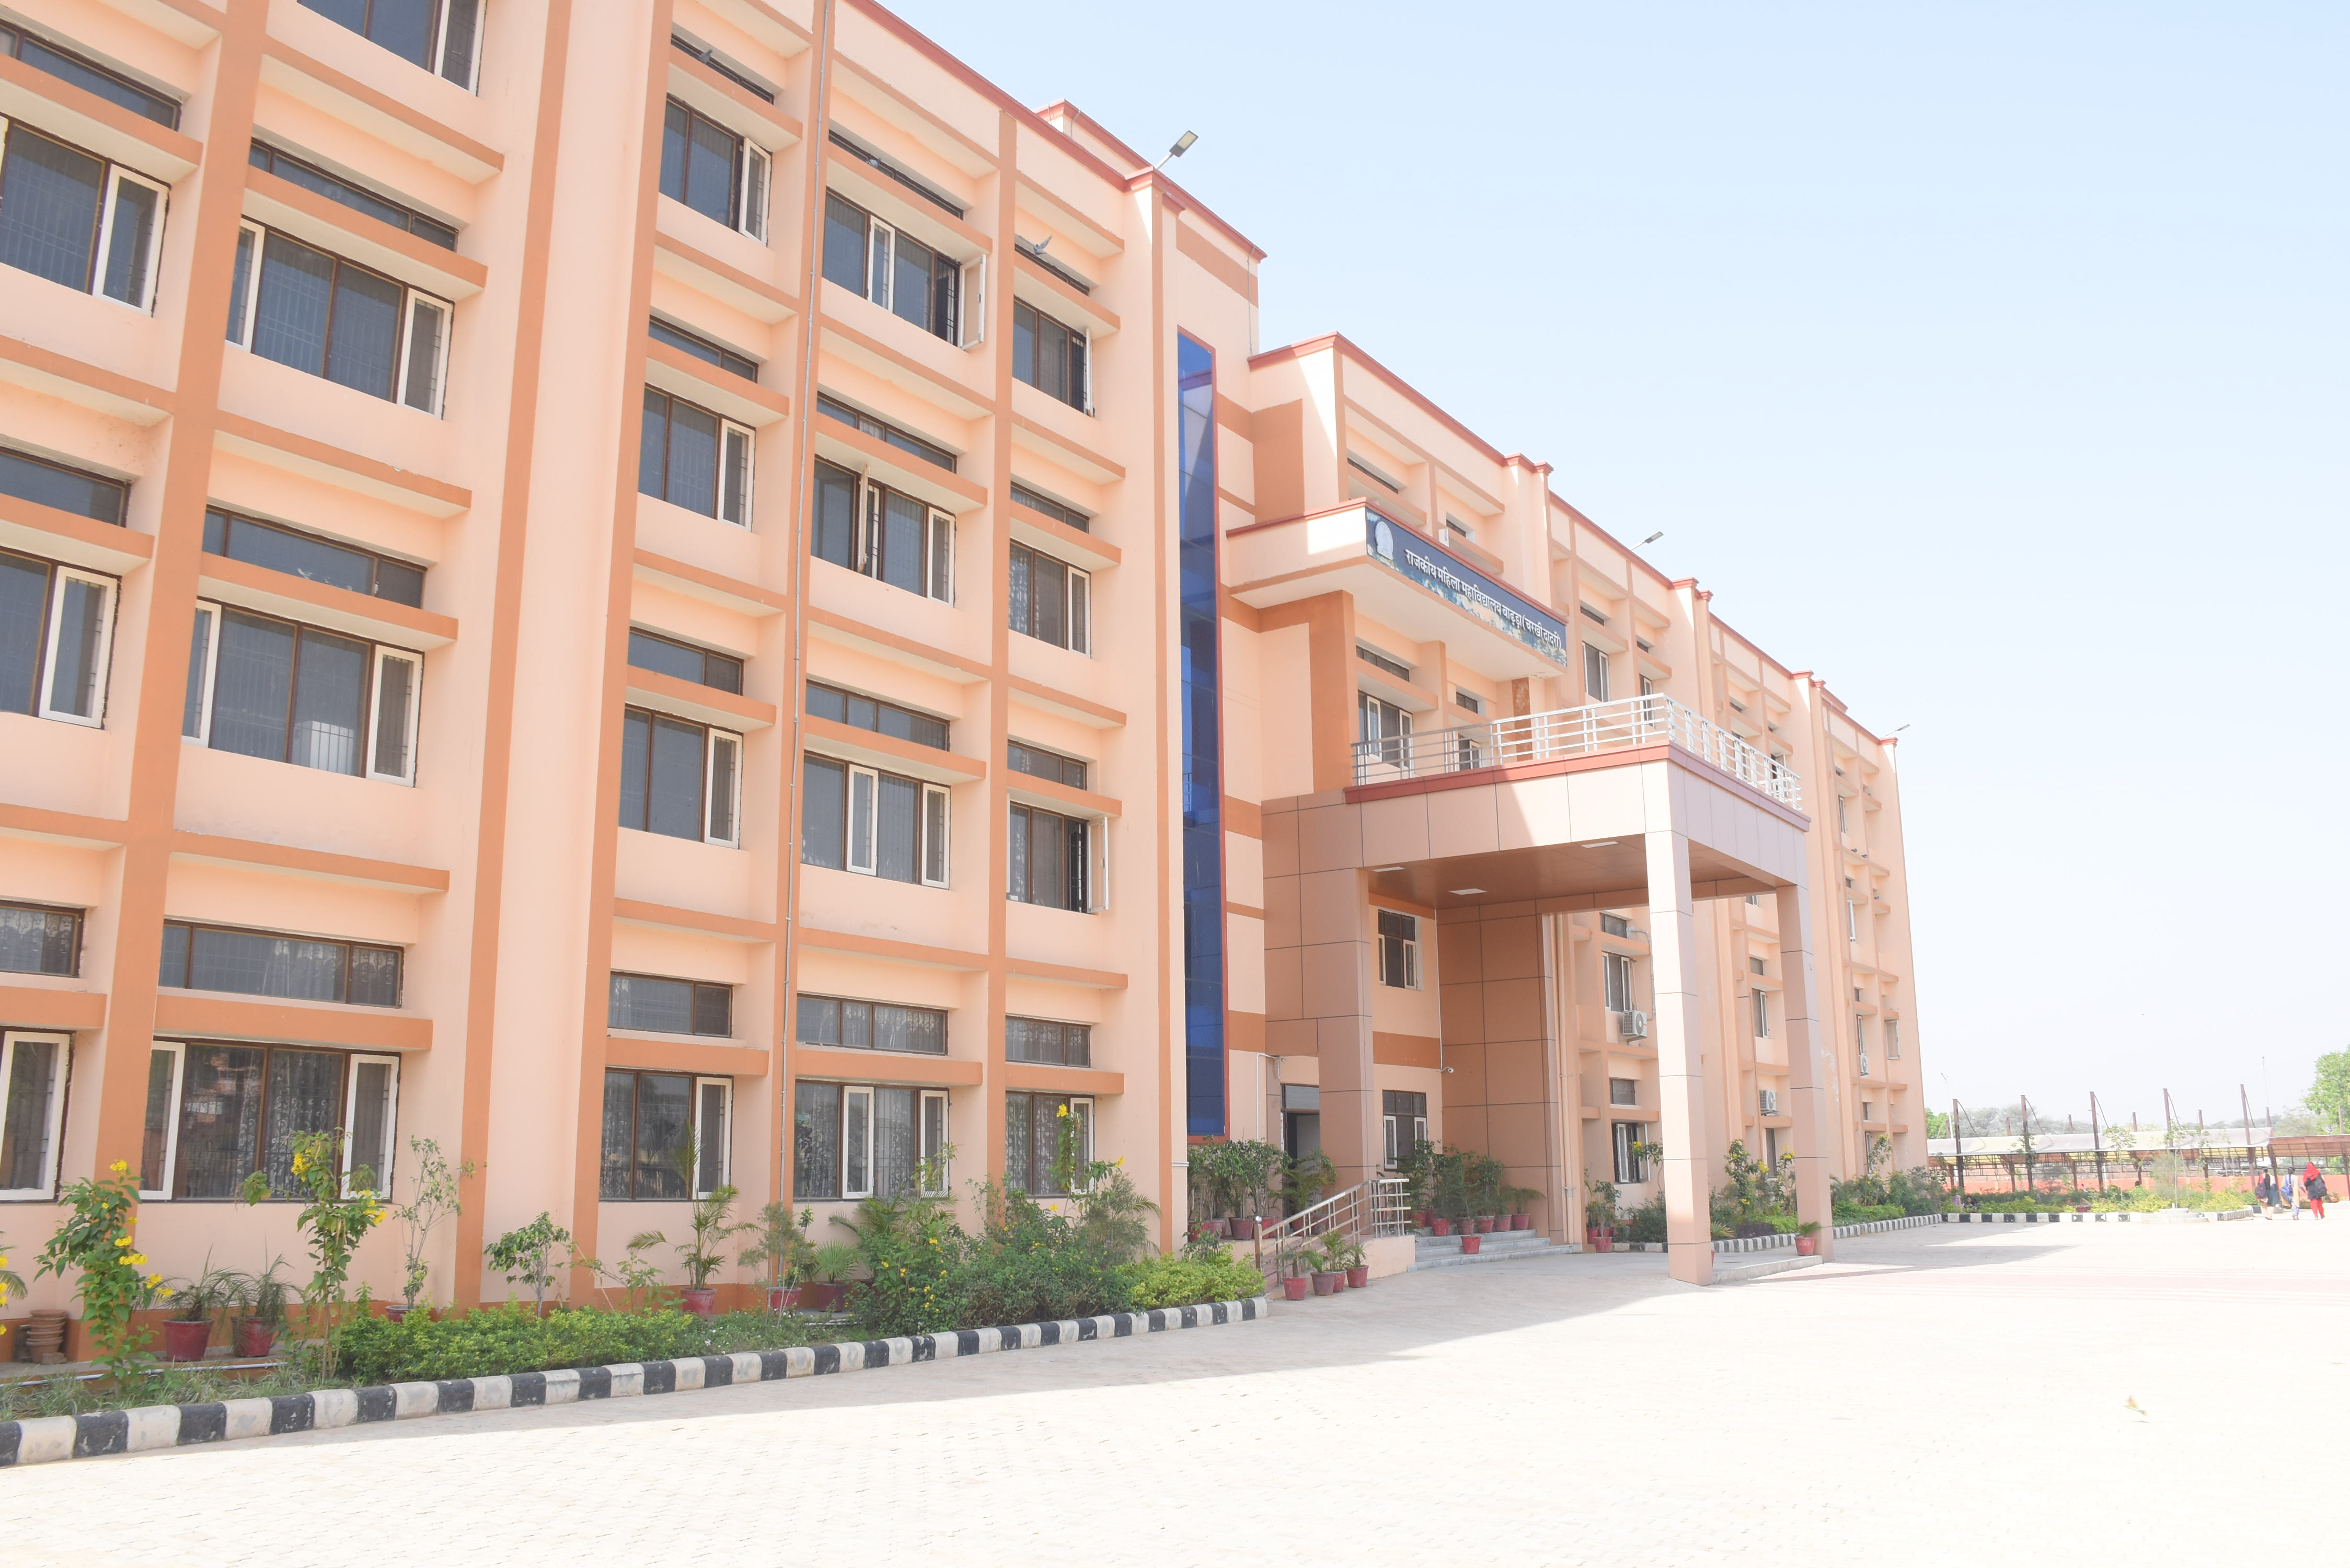 Government College for Women Education | Colleges